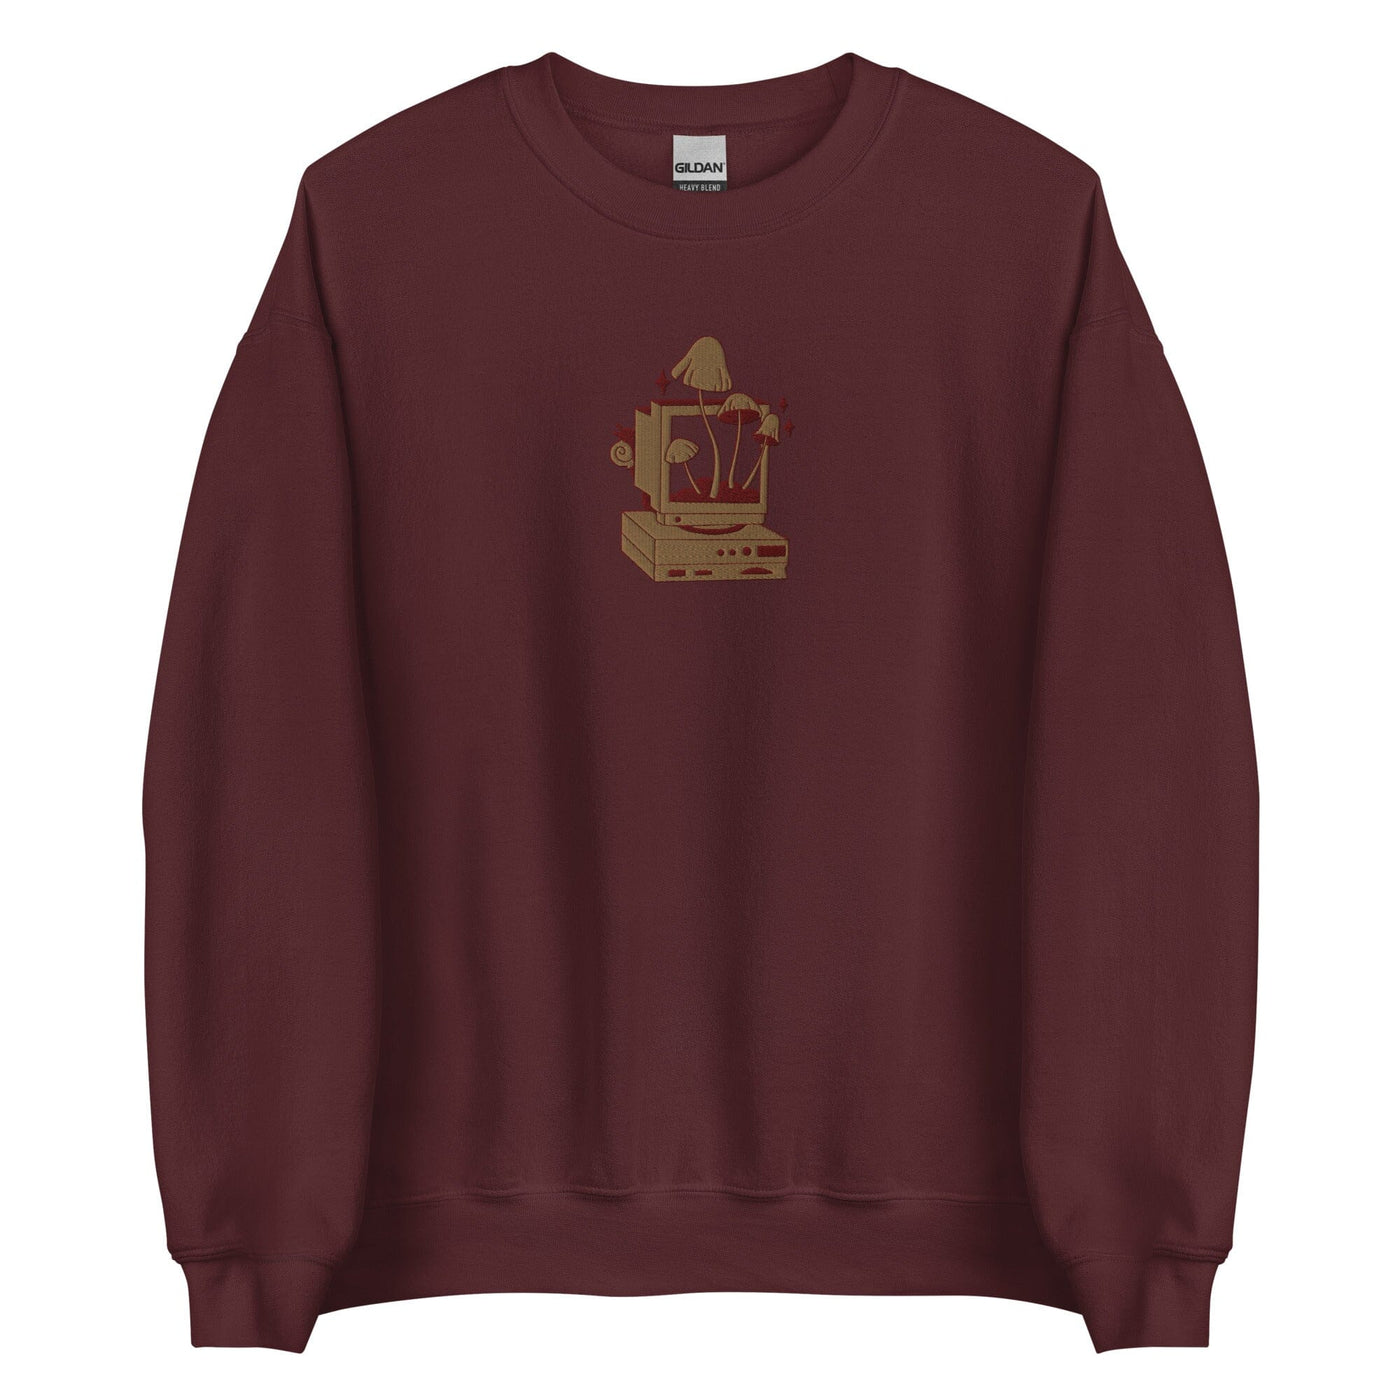 Cozy PC Gaming | Embroidered Unisex Sweatshirt | Cozy Gamer Threads & Thistles Inventory Maroon S 